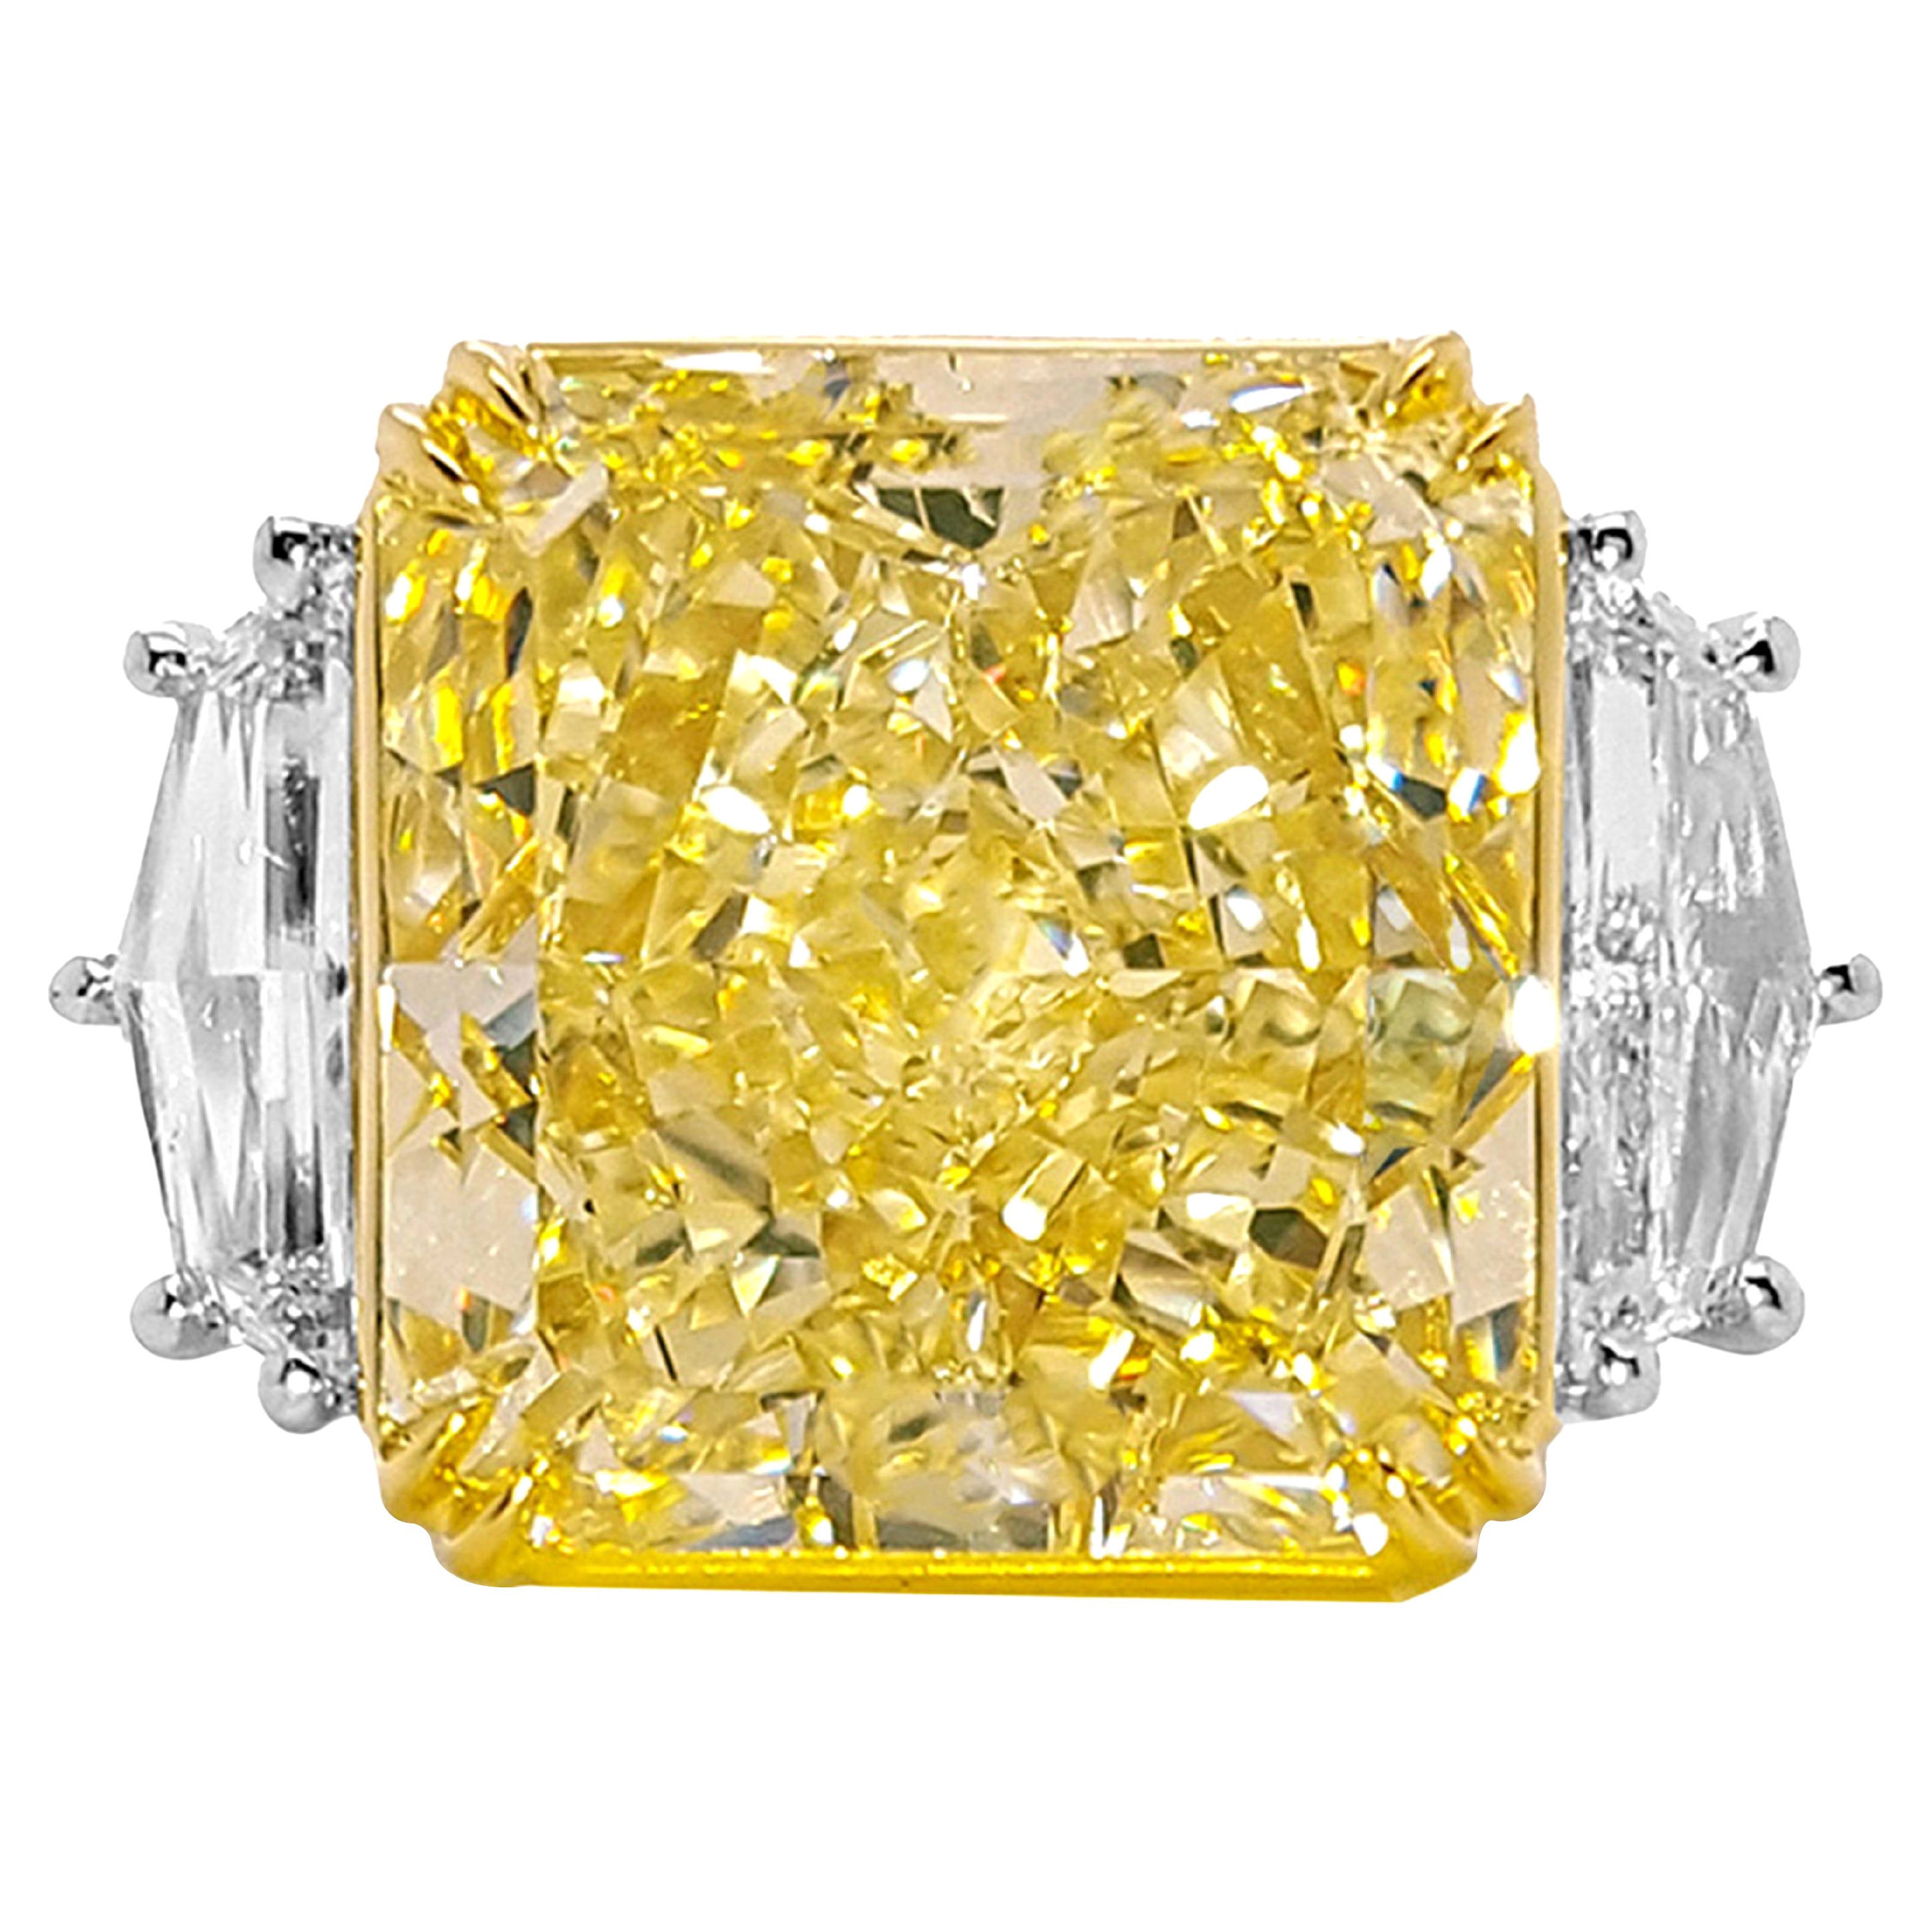 14 Carat Fancy Light Yellow Diamond Engagement Ring, 18K White Gold Gia Report For Sale